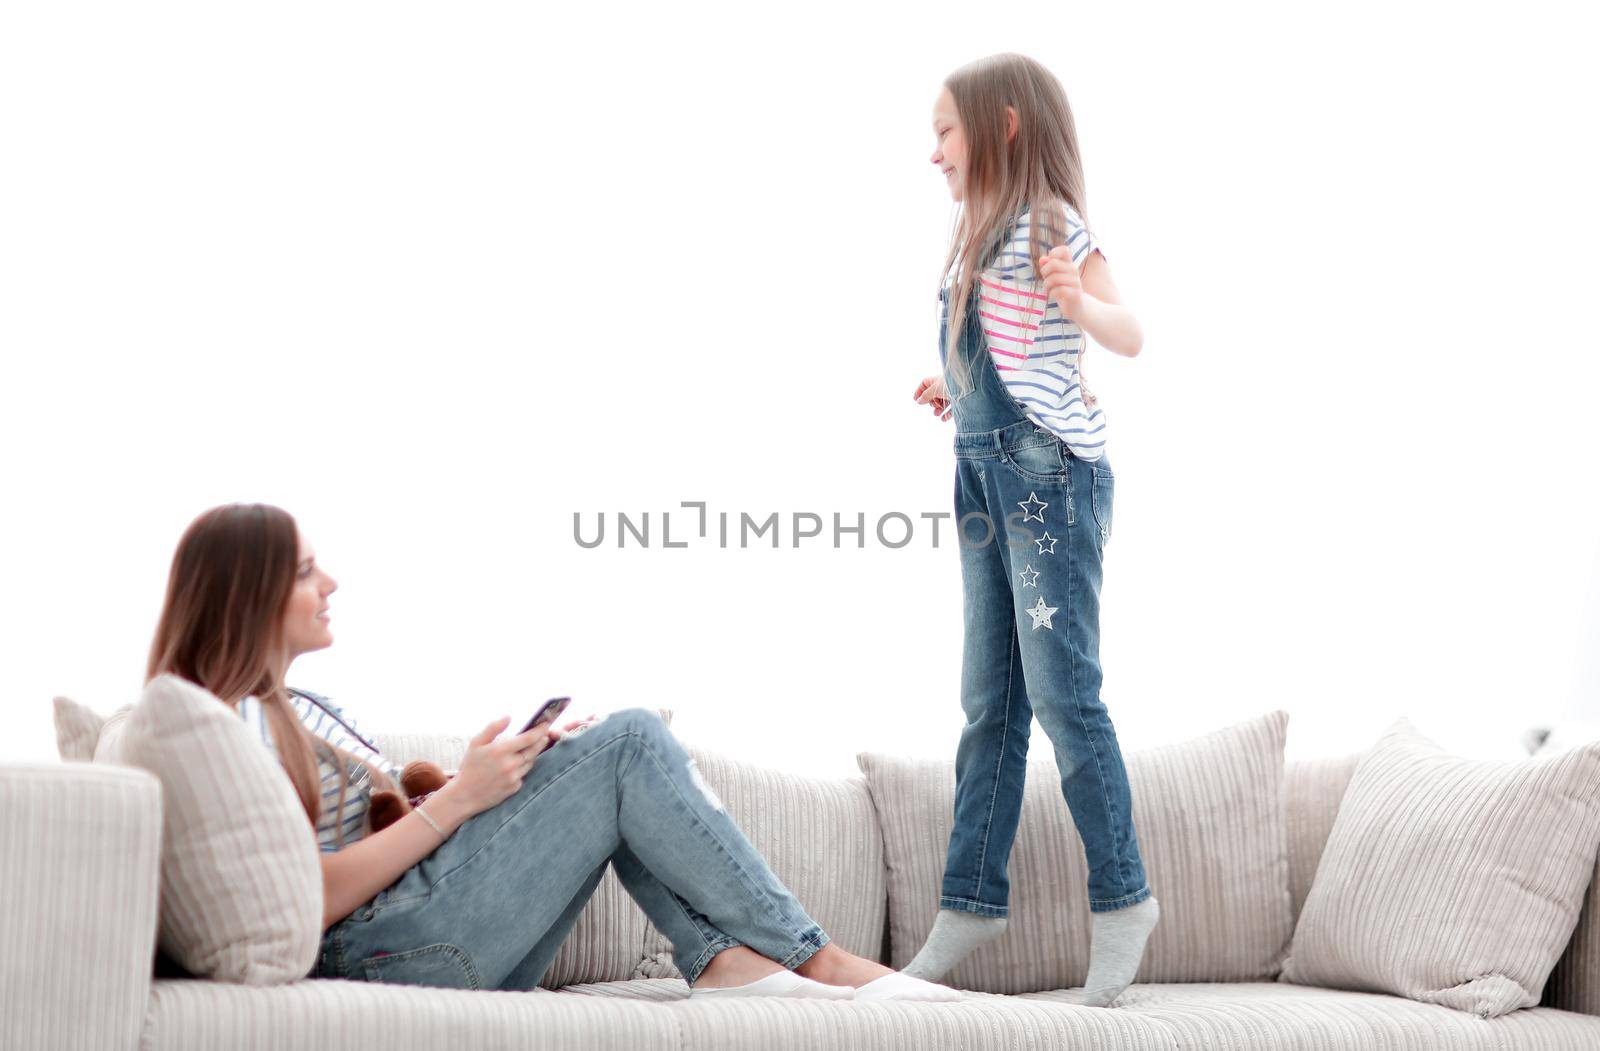 little girl jumping on the couch on the couch in the living room.the concept of children's happiness